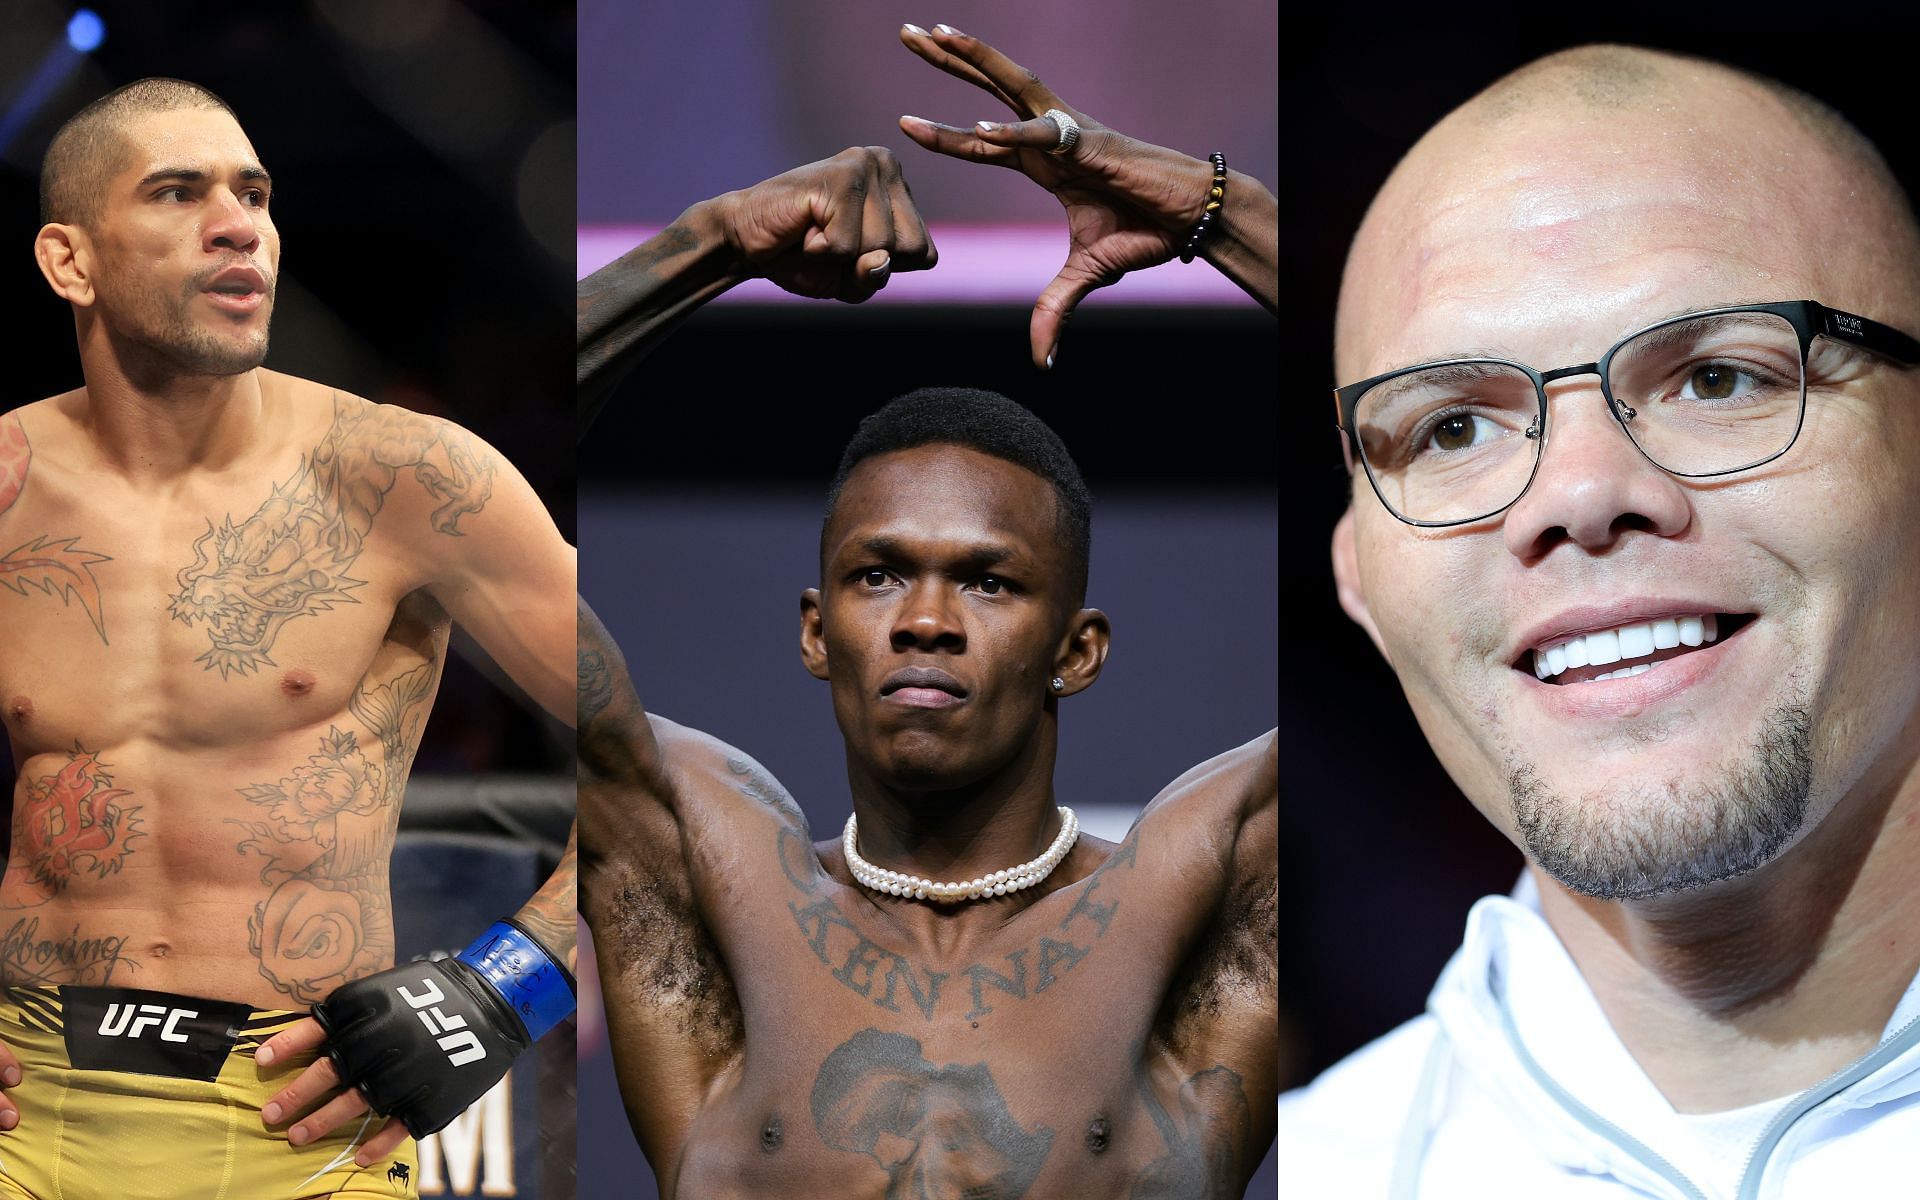 Alex Pereira (left), Israel Adesanya (middle) and Anthony Smith (right) [Image courtesy: Getty Images]